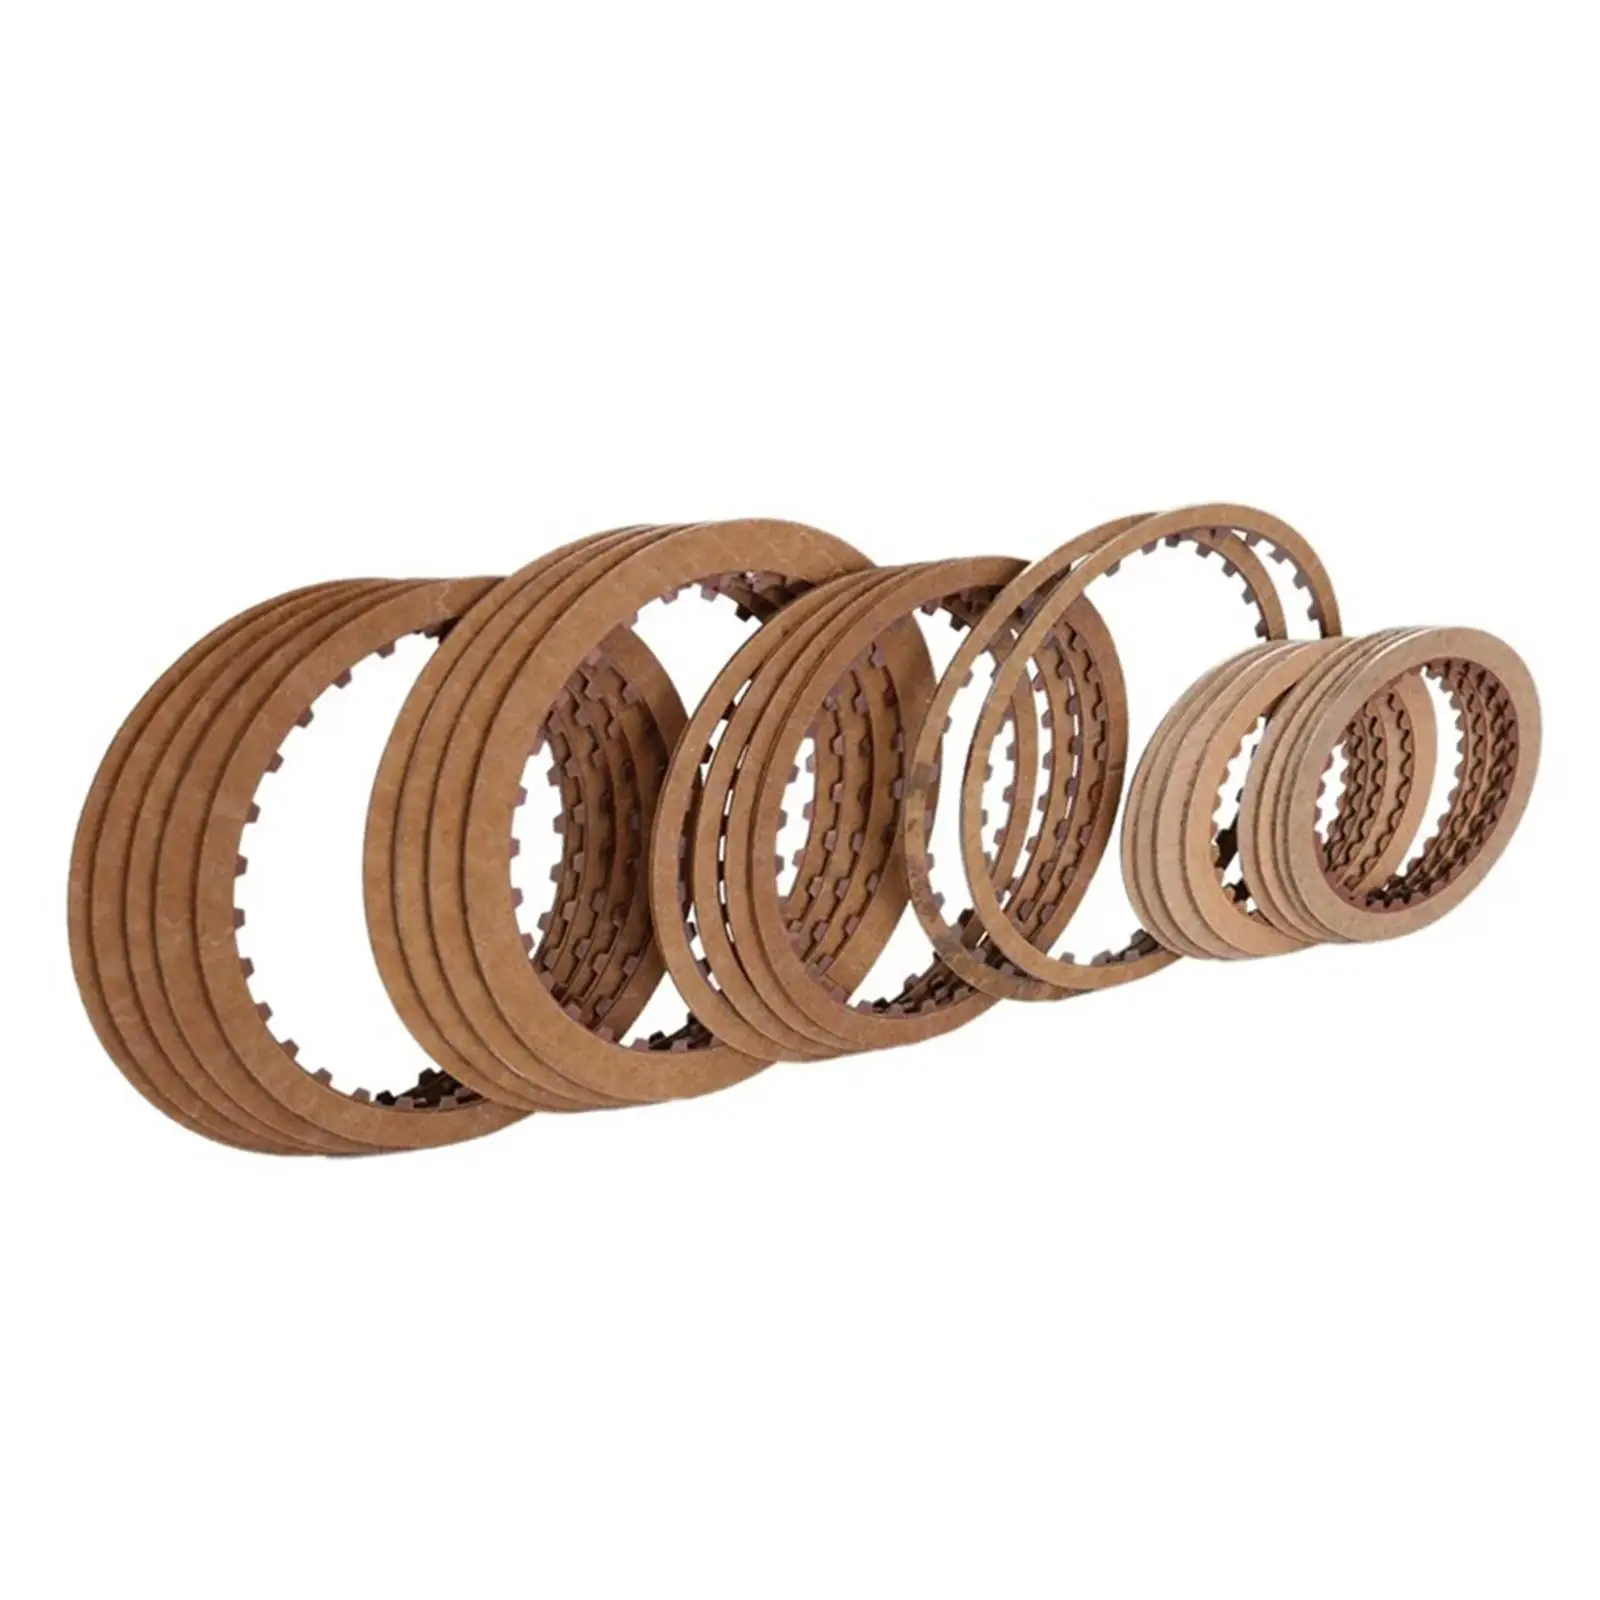 Car Transmission Clutch Plate Kit Portable Replacement Durable Gearbox Friction Plates for Toyota Vios 2004-On U540E U541E